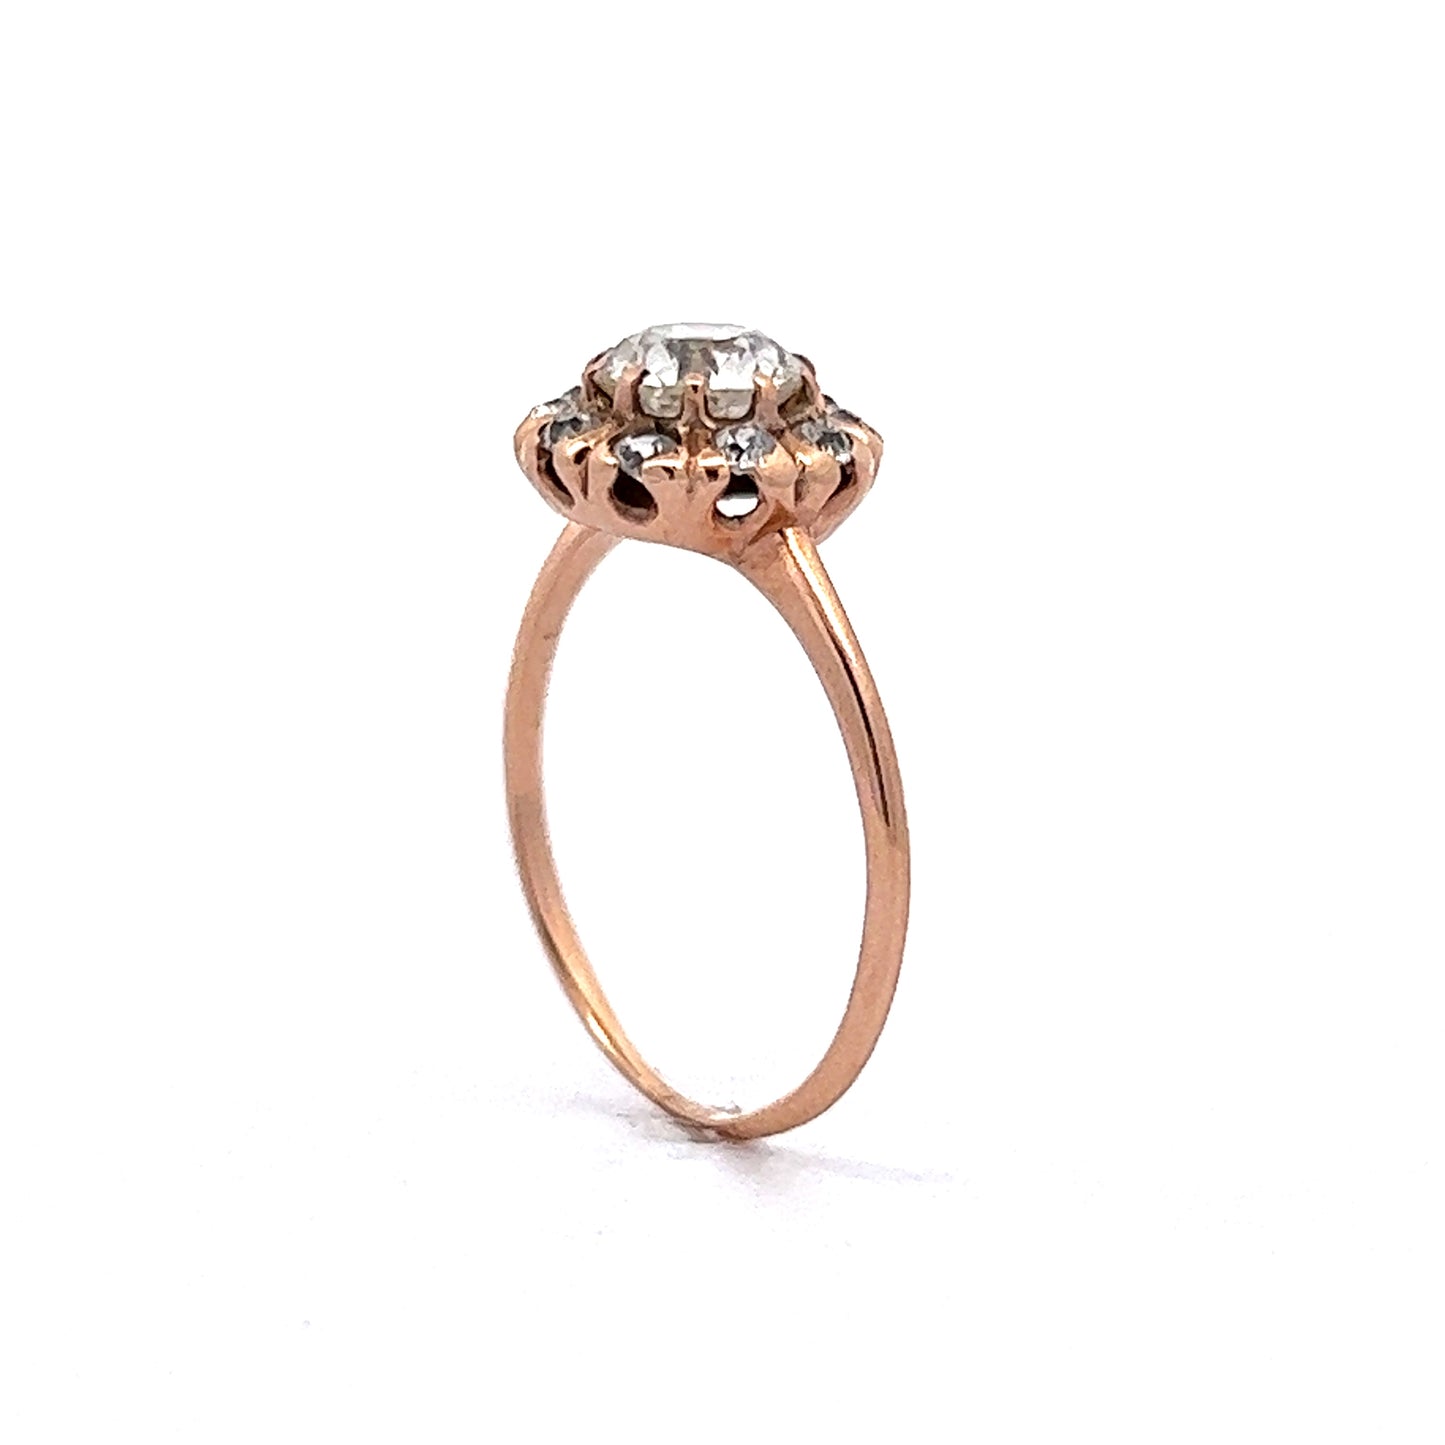 .93 Victorian Diamond Cluster Engagement Ring in 12K Rose Gold